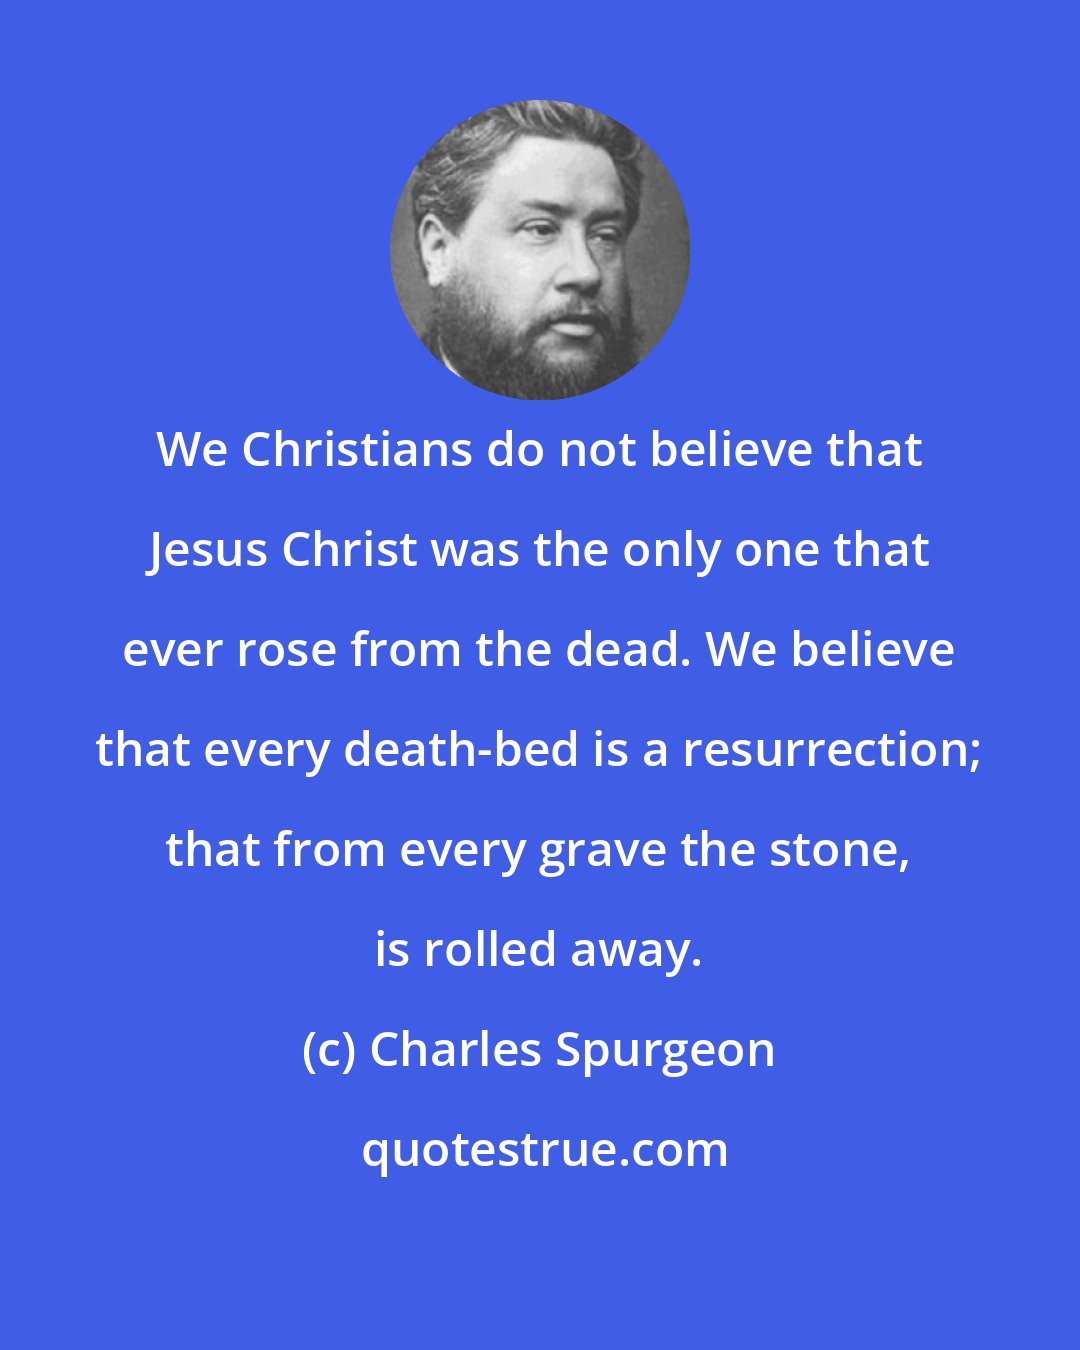 Charles Spurgeon: We Christians do not believe that Jesus Christ was the only one that ever rose from the dead. We believe that every death-bed is a resurrection; that from every grave the stone, is rolled away.